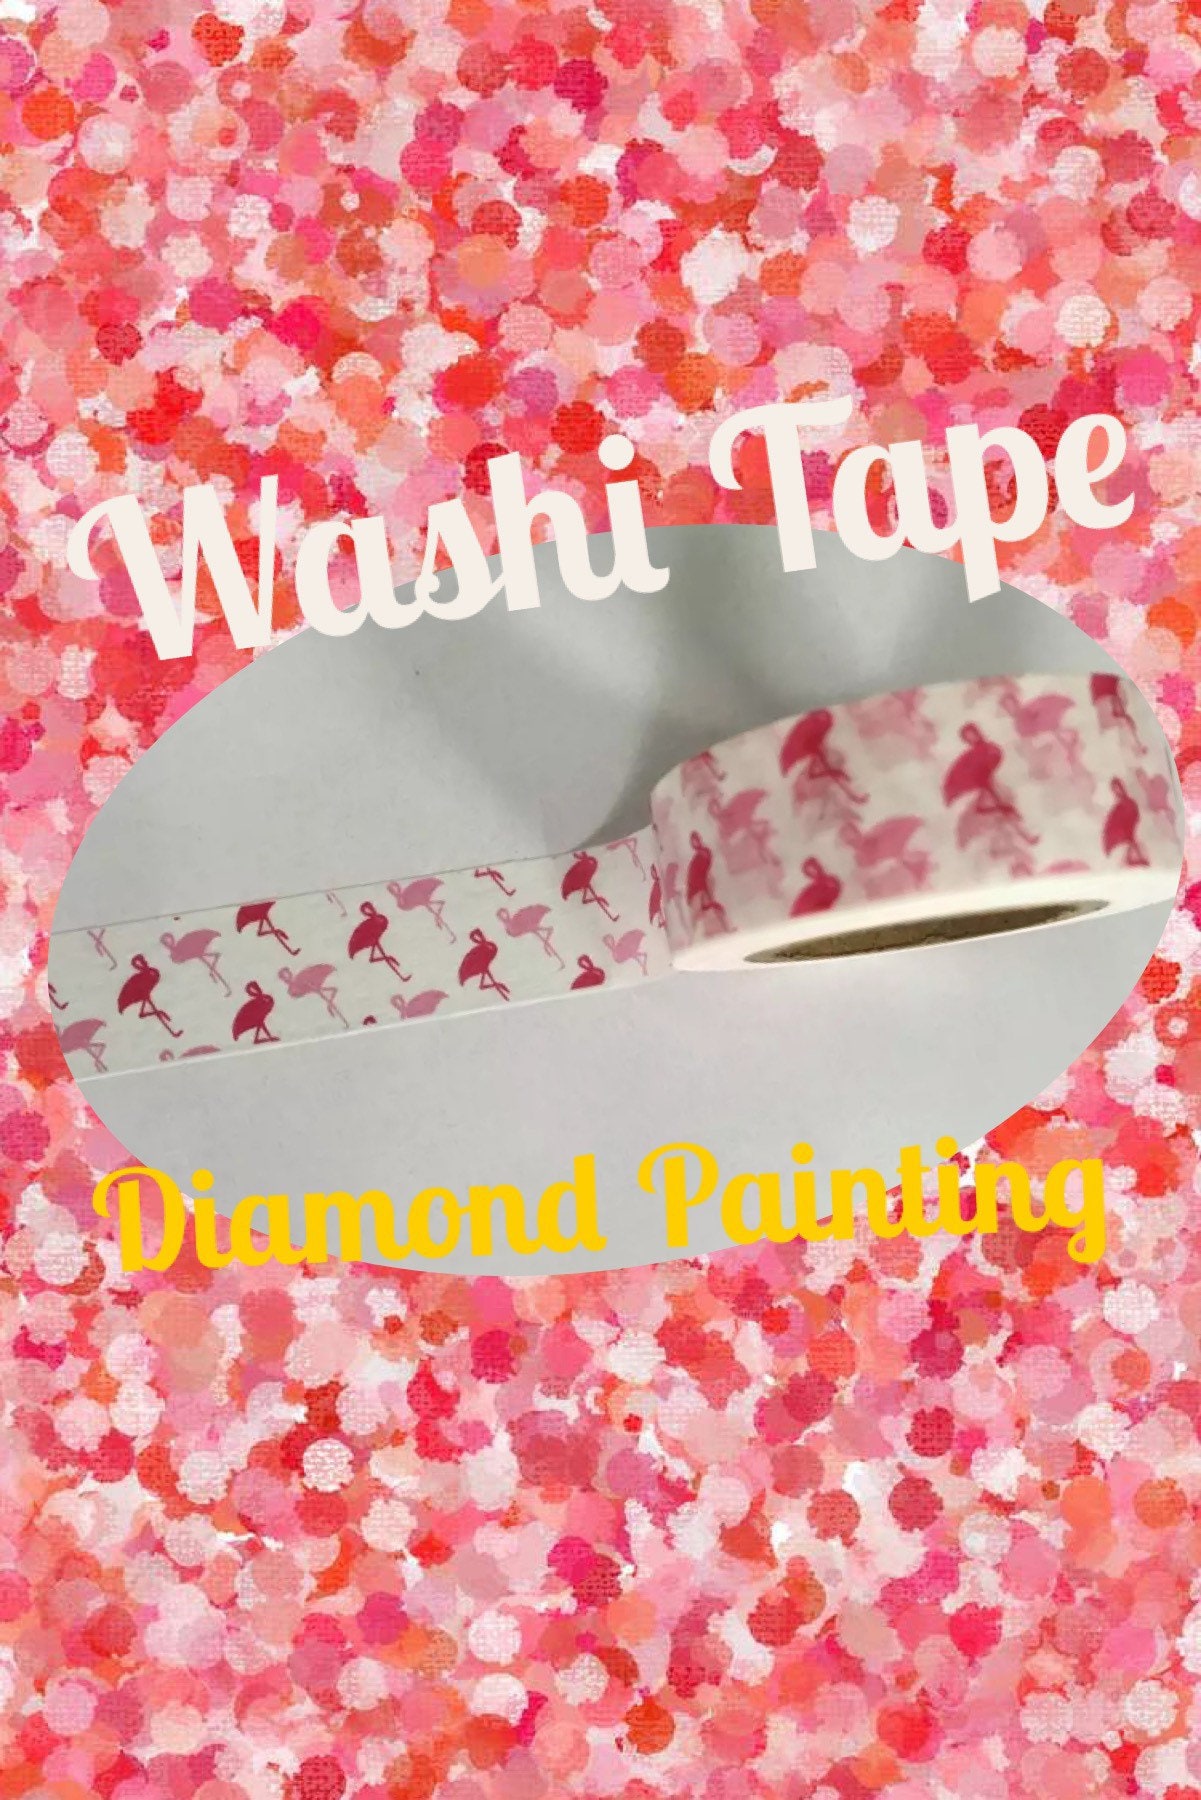 How To Section Your Diamond Painting Canvas with Washi Tape